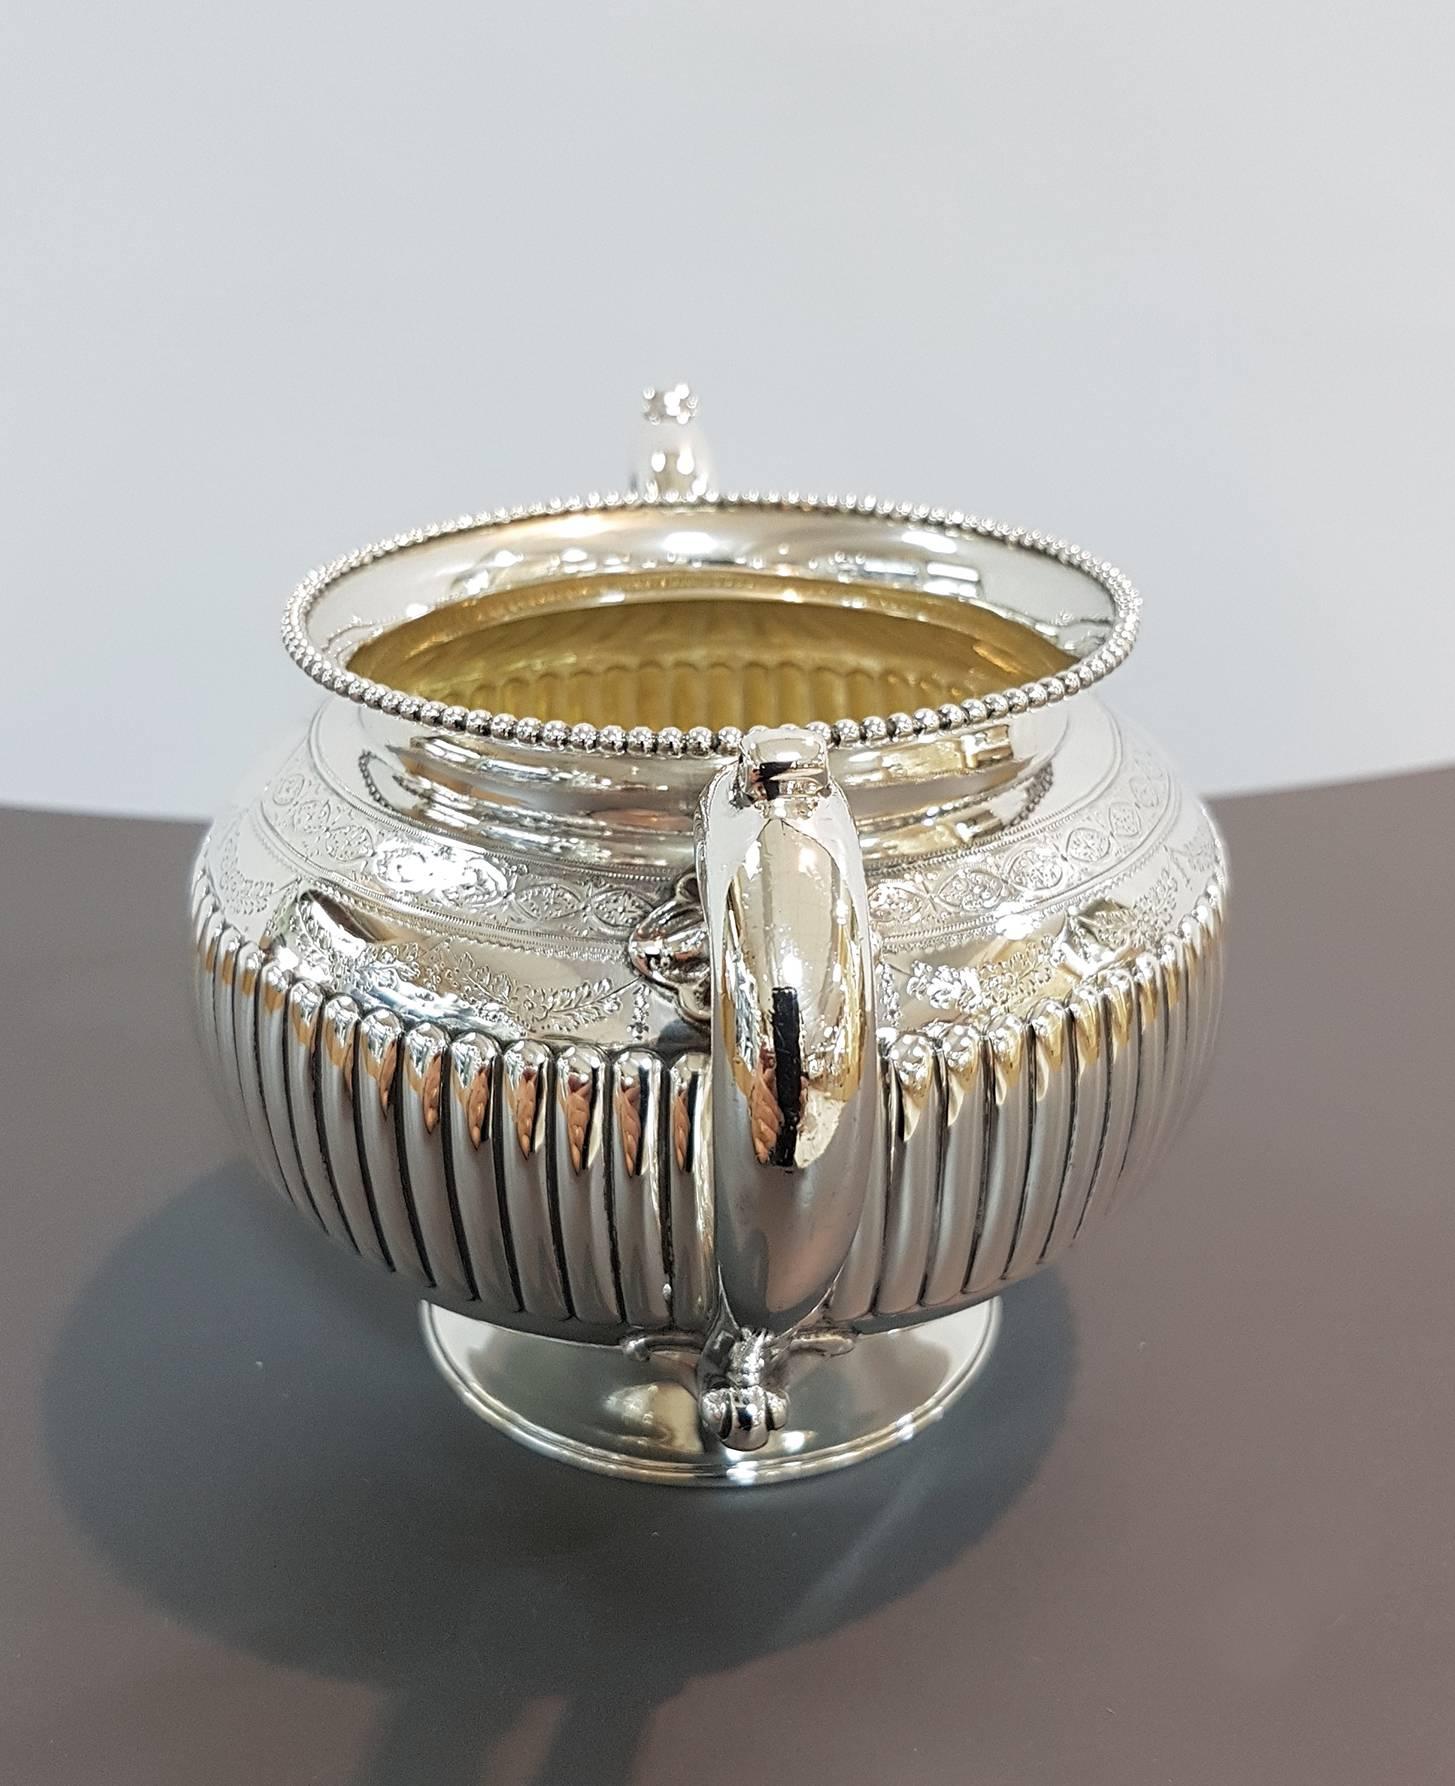 English Antique Victorian Sterling Silver Sugar Bowl with Half Fluted Decorations